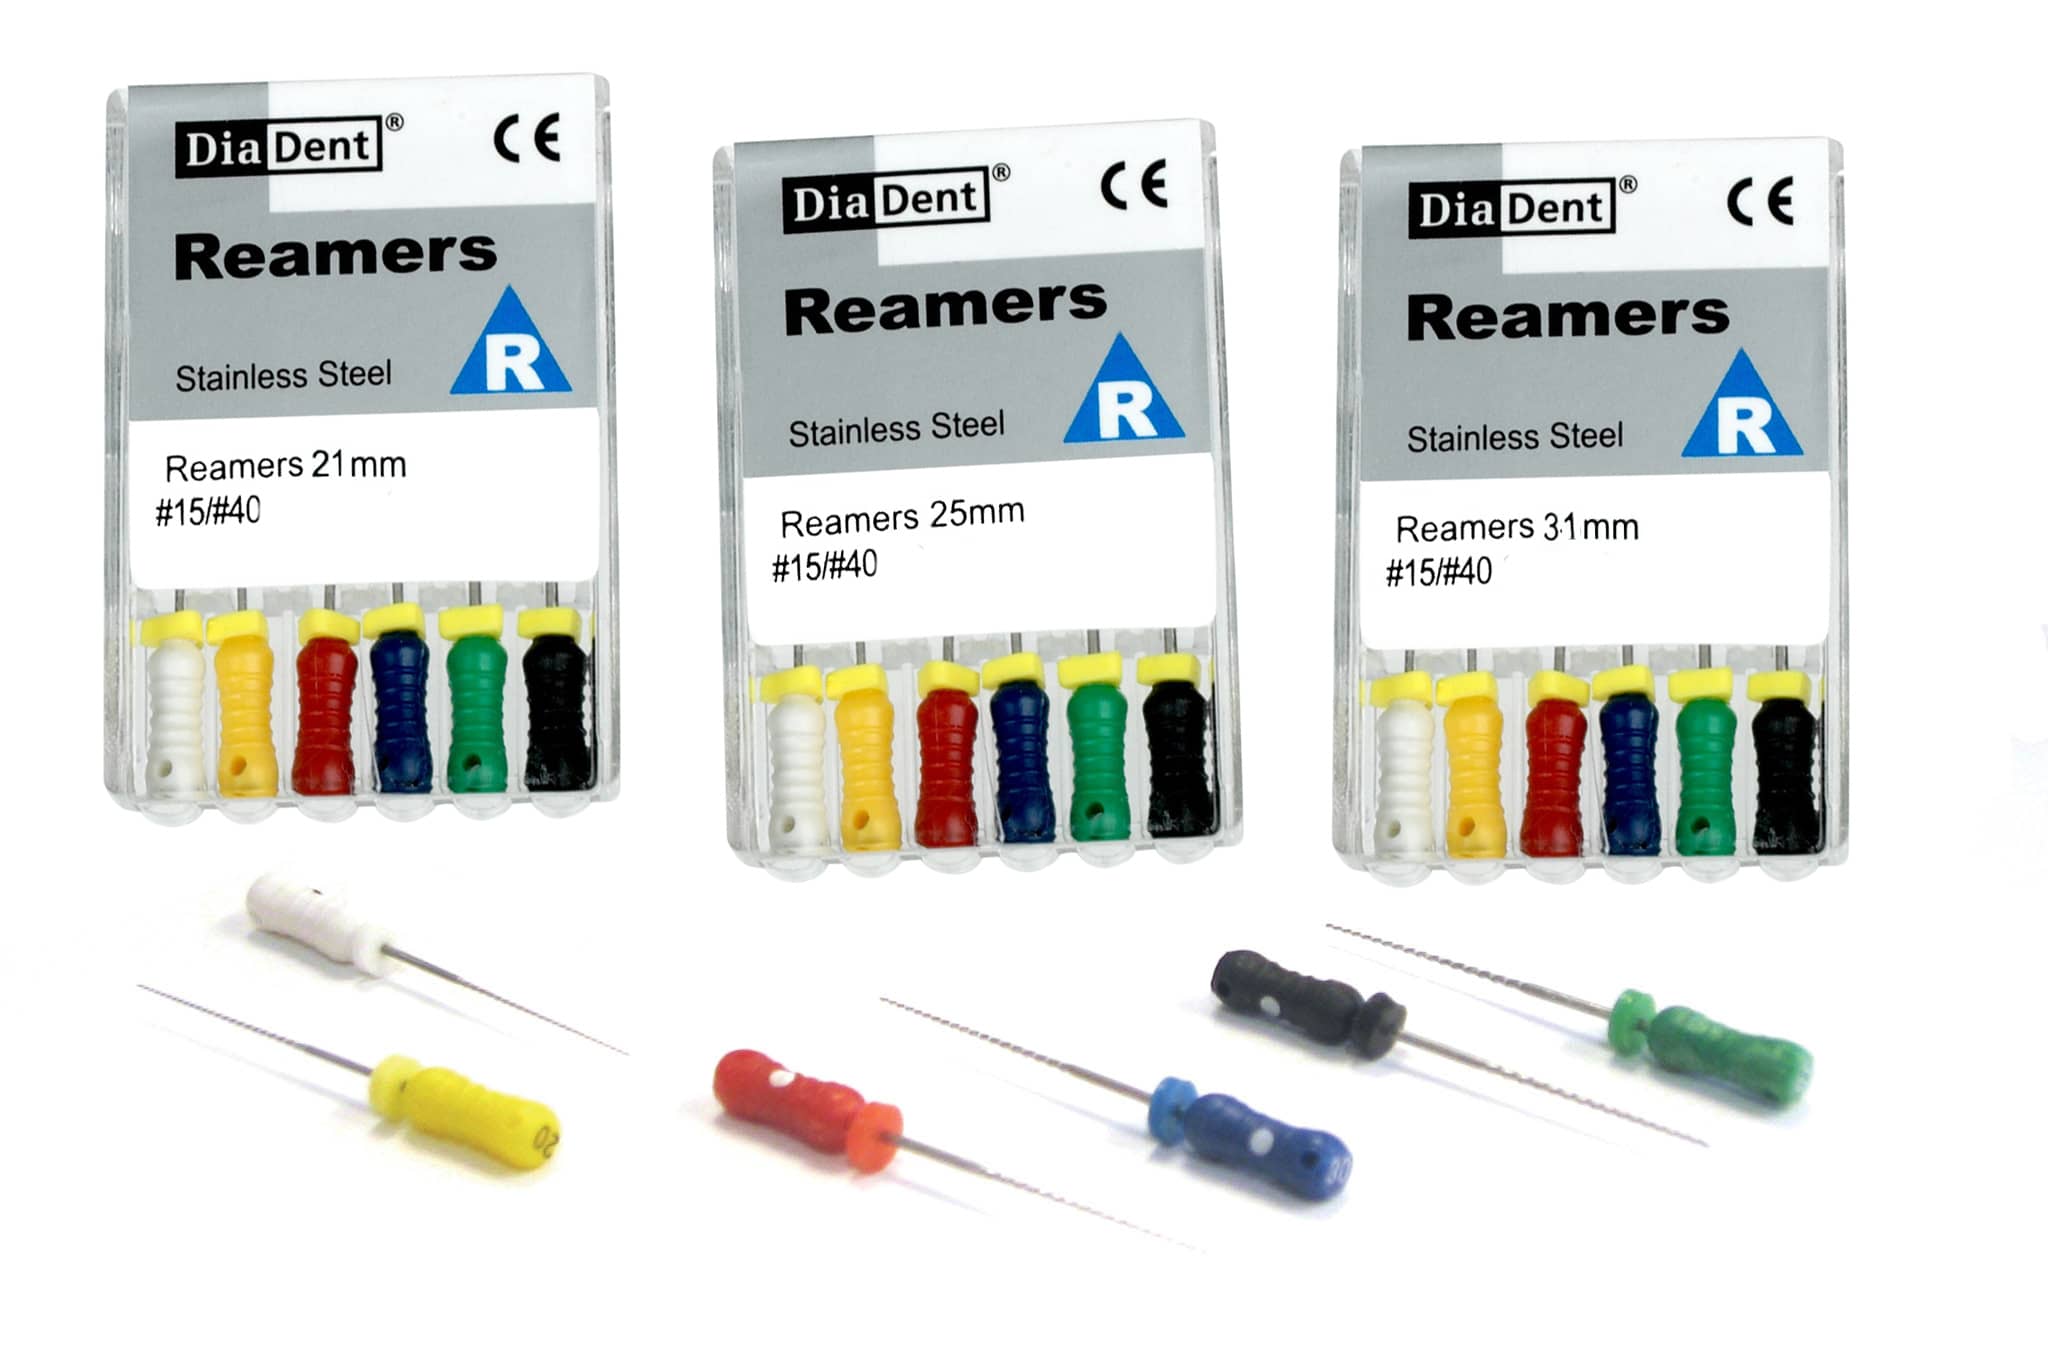 REAMERS Diadent 31mm - 30